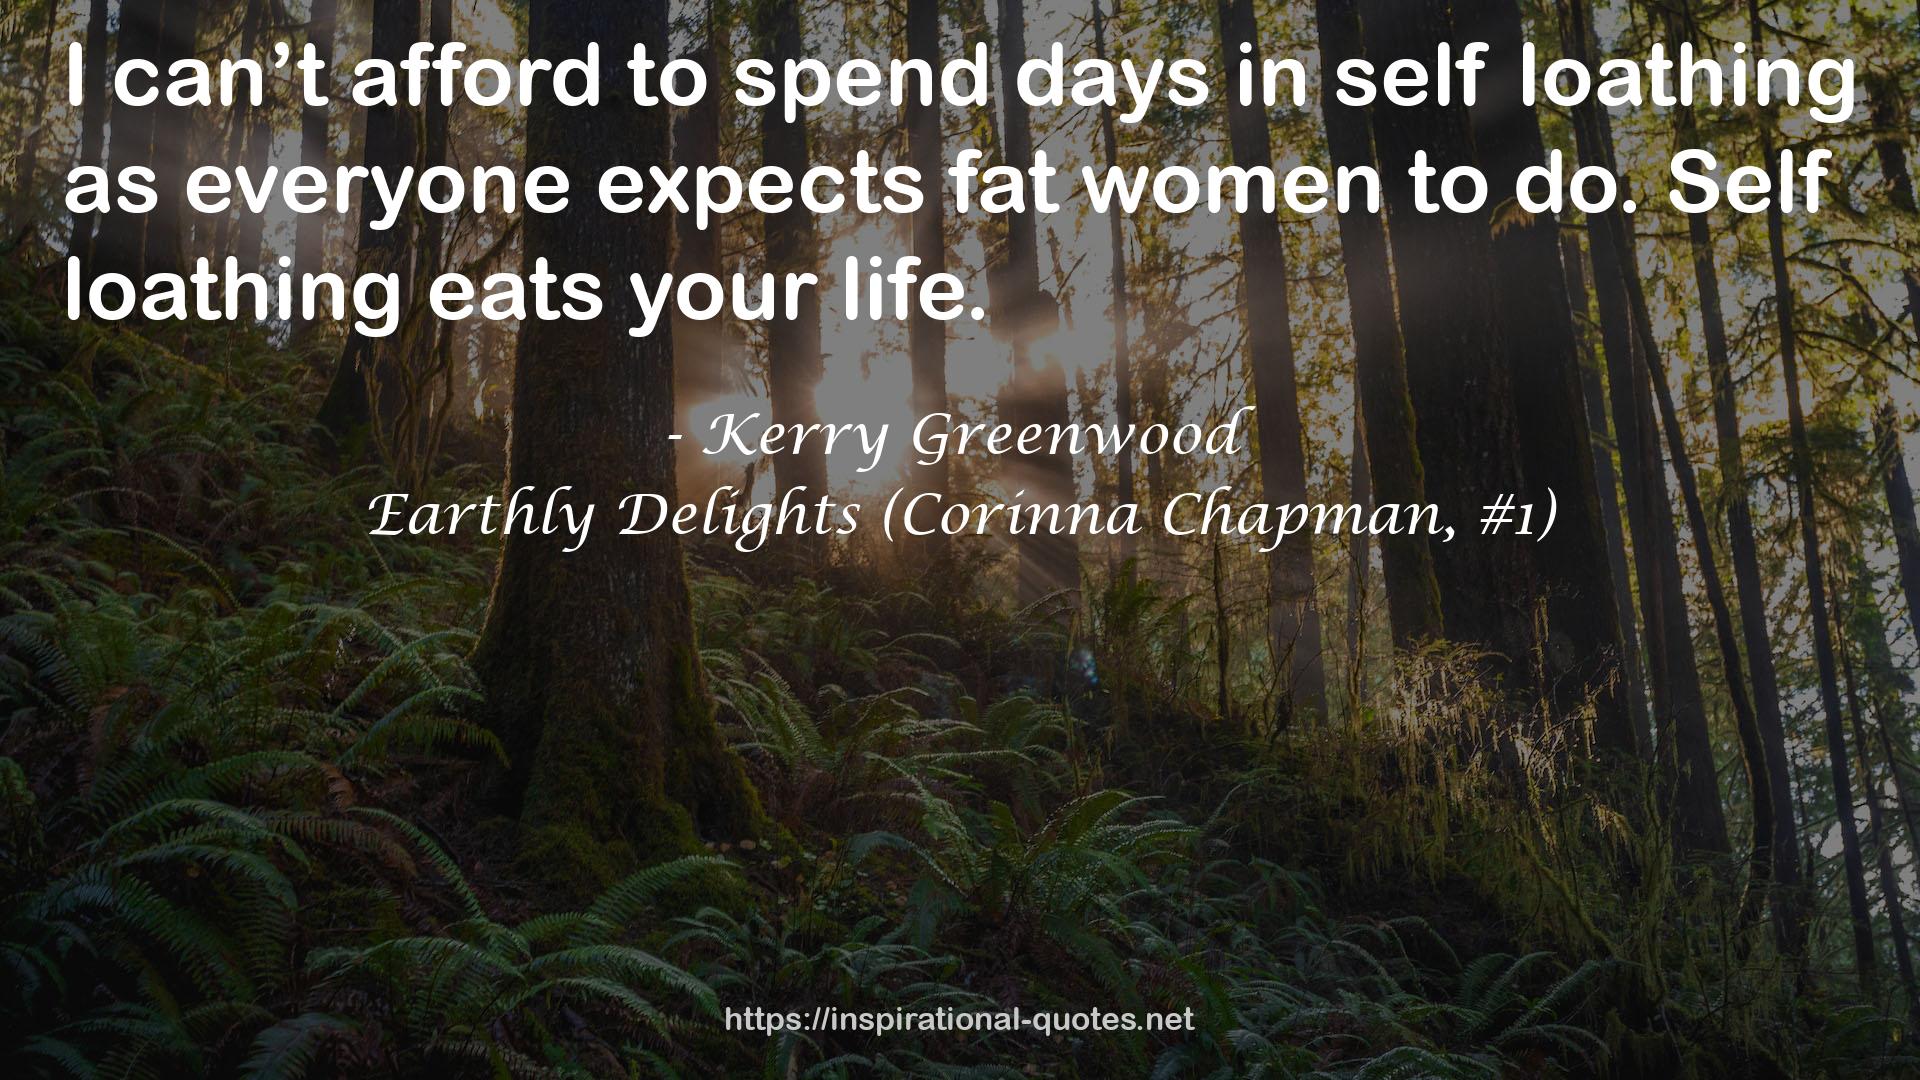 Earthly Delights (Corinna Chapman, #1) QUOTES